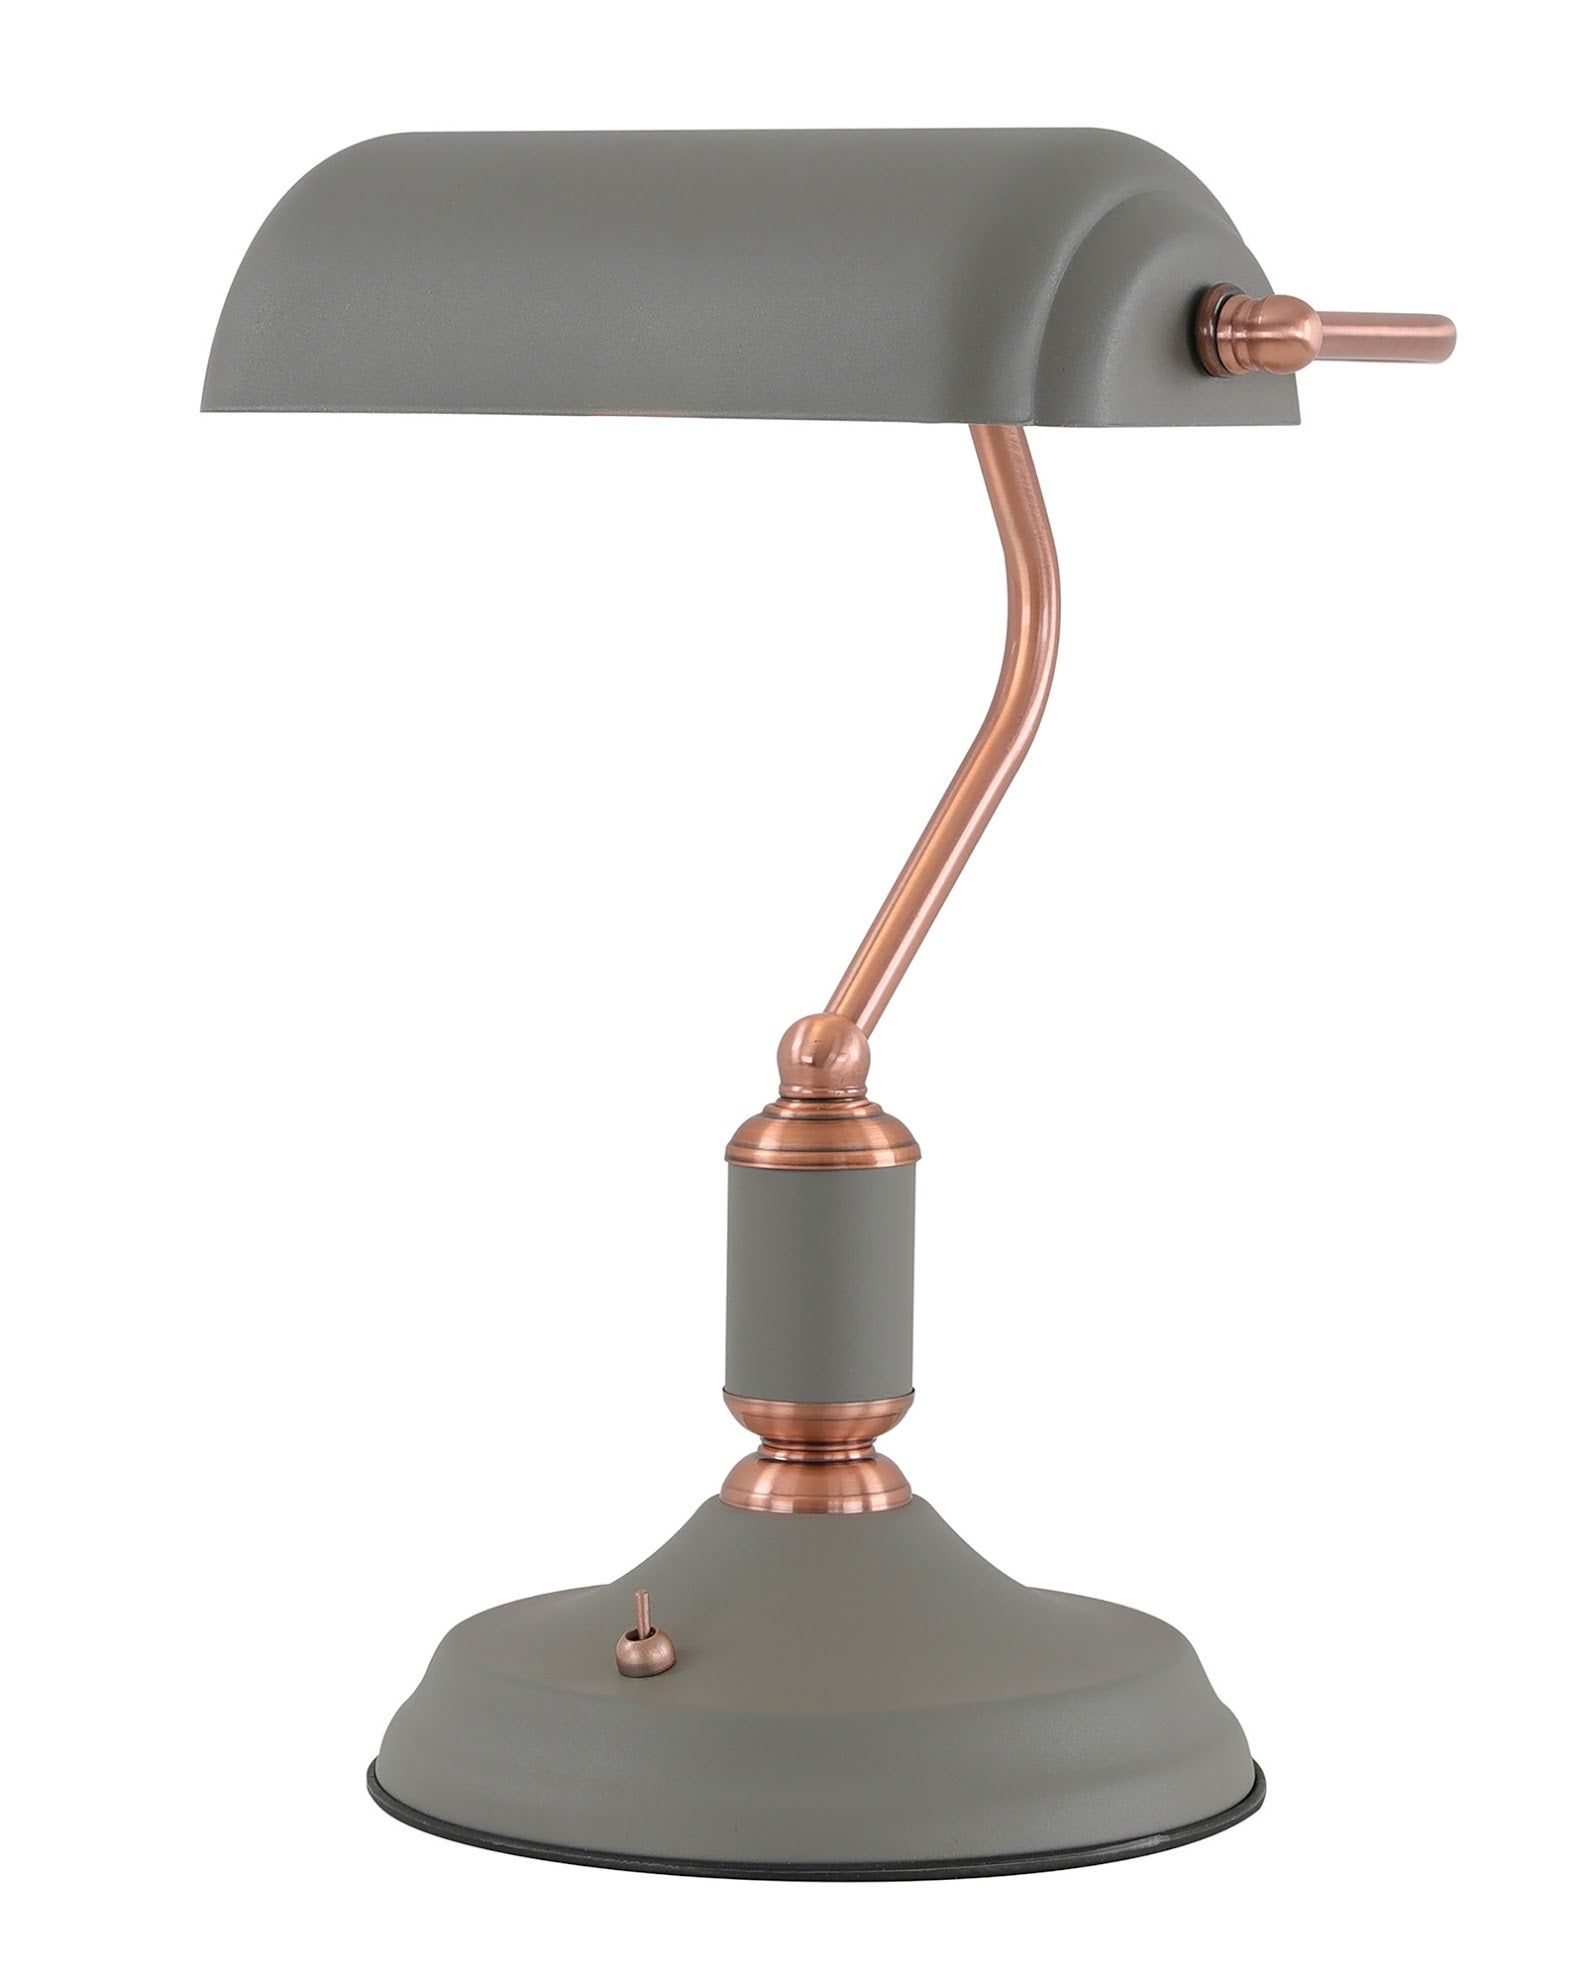 Ietson Table Lamp 1 Light With Toggle Switch, Sand Grey/Copper